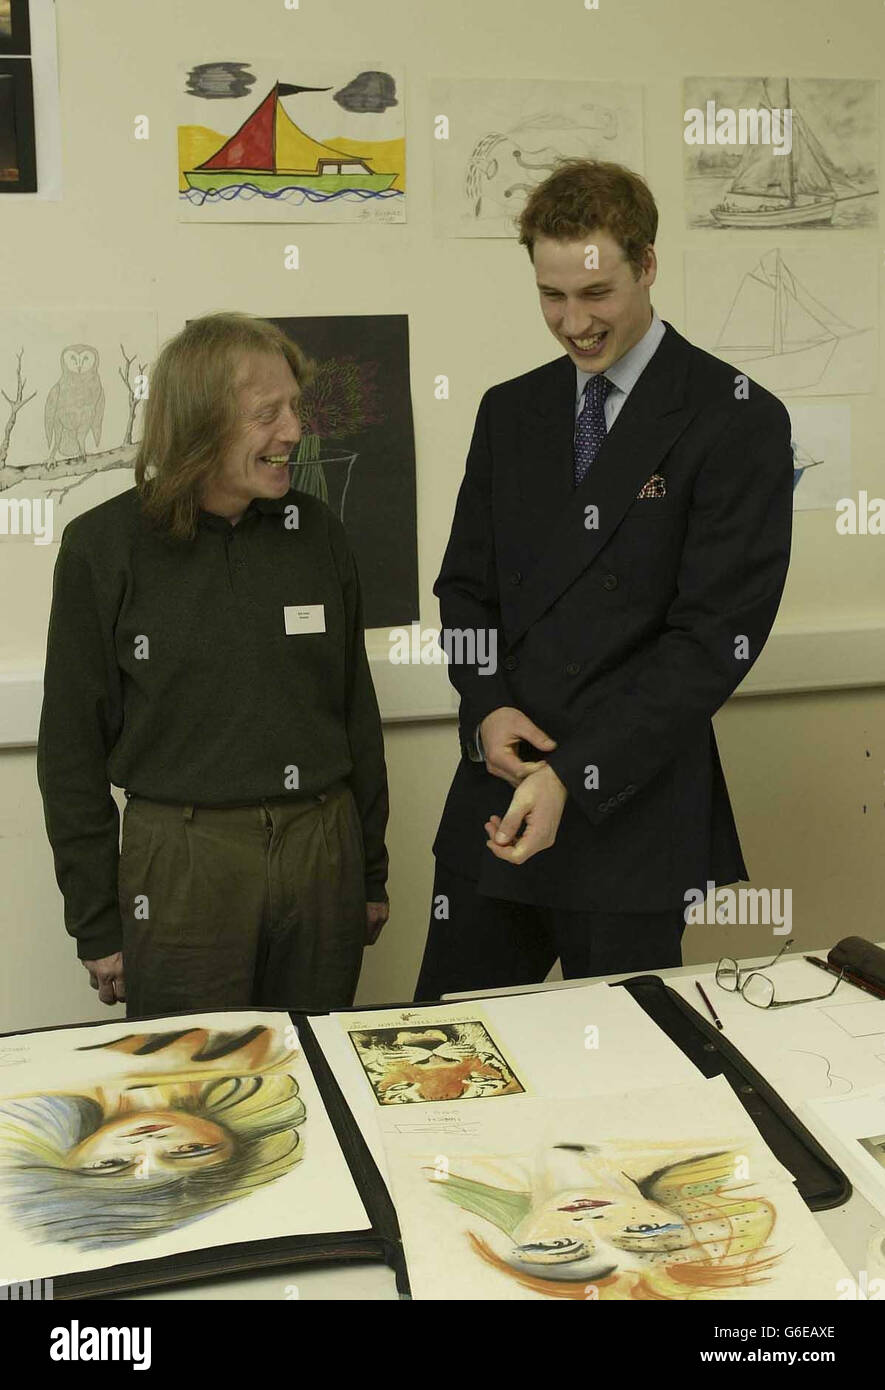 Prince William meets homeless Robert Jones in the art room of the NASH Homeless Centre, during the Prince's visit with his father, Prince Charles, to the centre in Newport, South Wales. Stock Photo